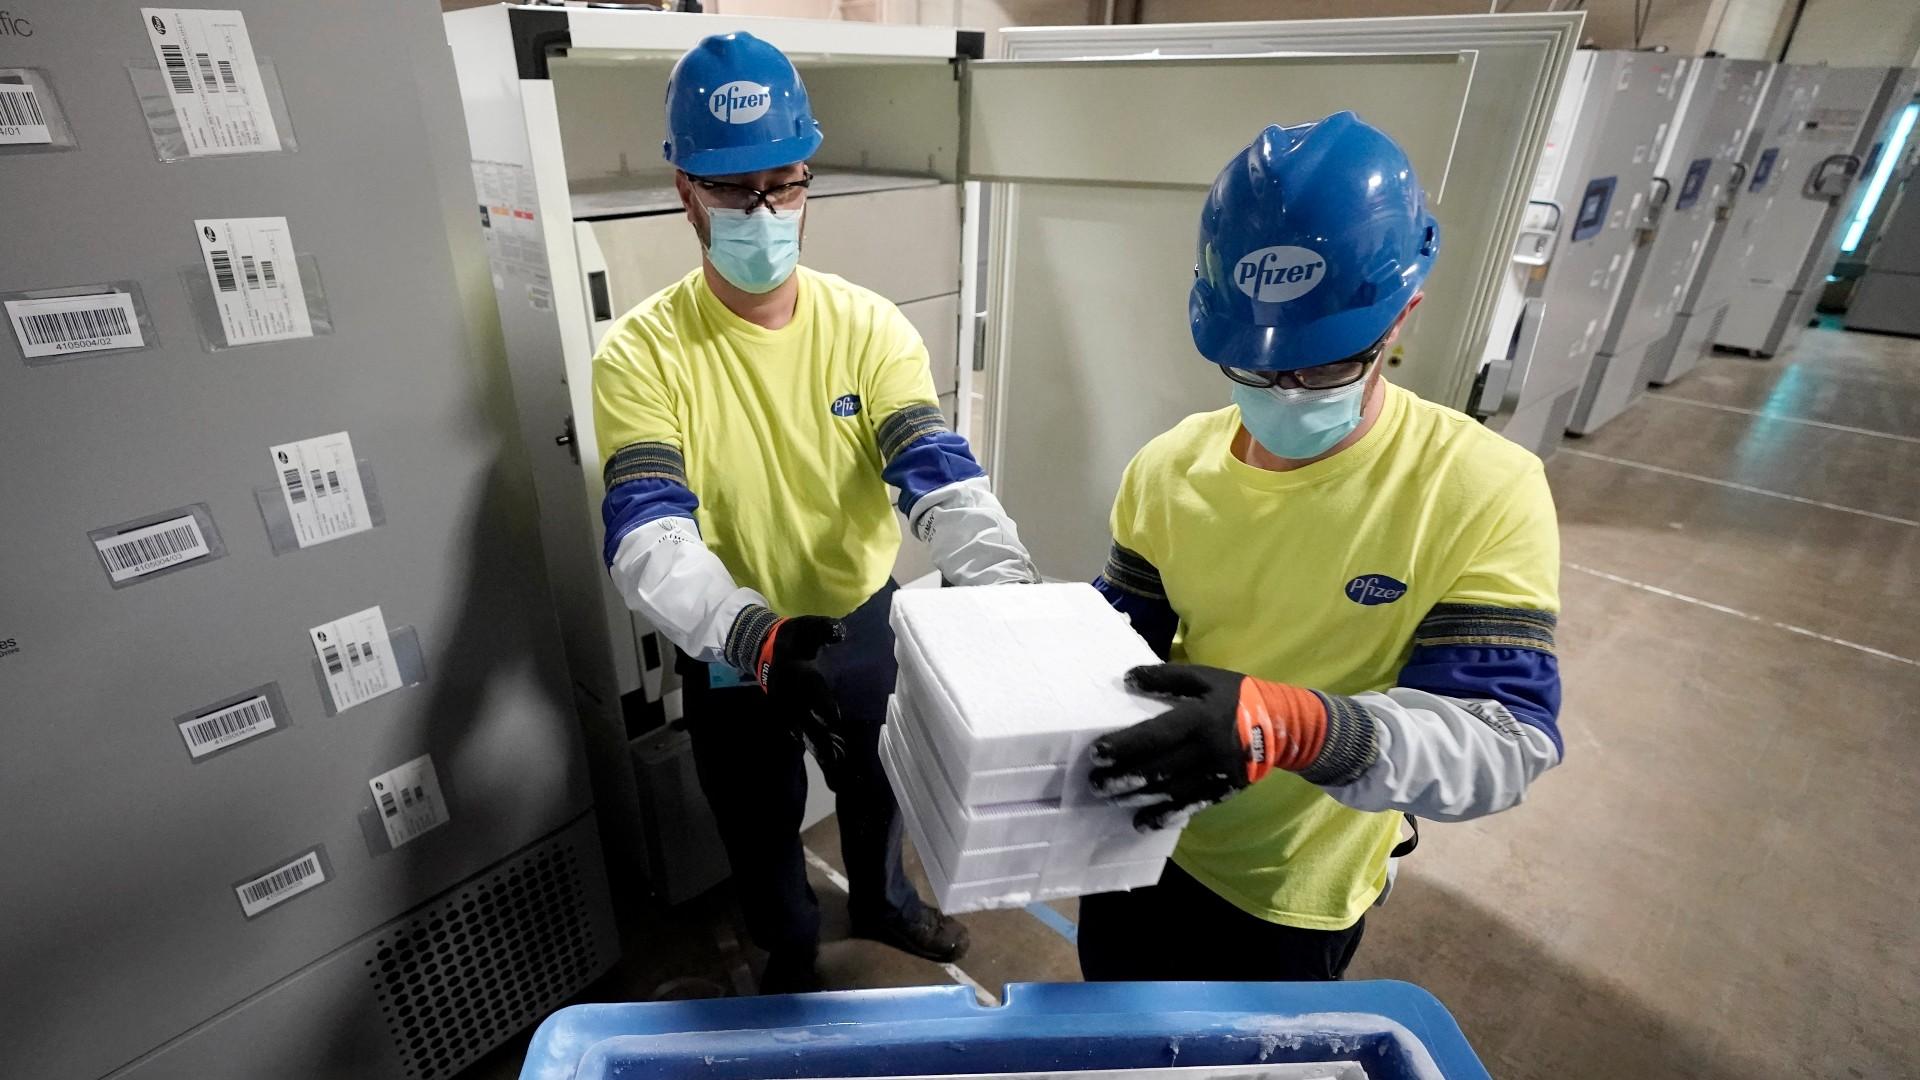 Boxes containing the Pfizer COVID-19 vaccine are prepared to be shipped at the Pfizer Global Supply Kalamazoo manufacturing plant in Portage, Mich., Dec. 13, 2020. (AP Photo / Morry Gash, Pool, File)